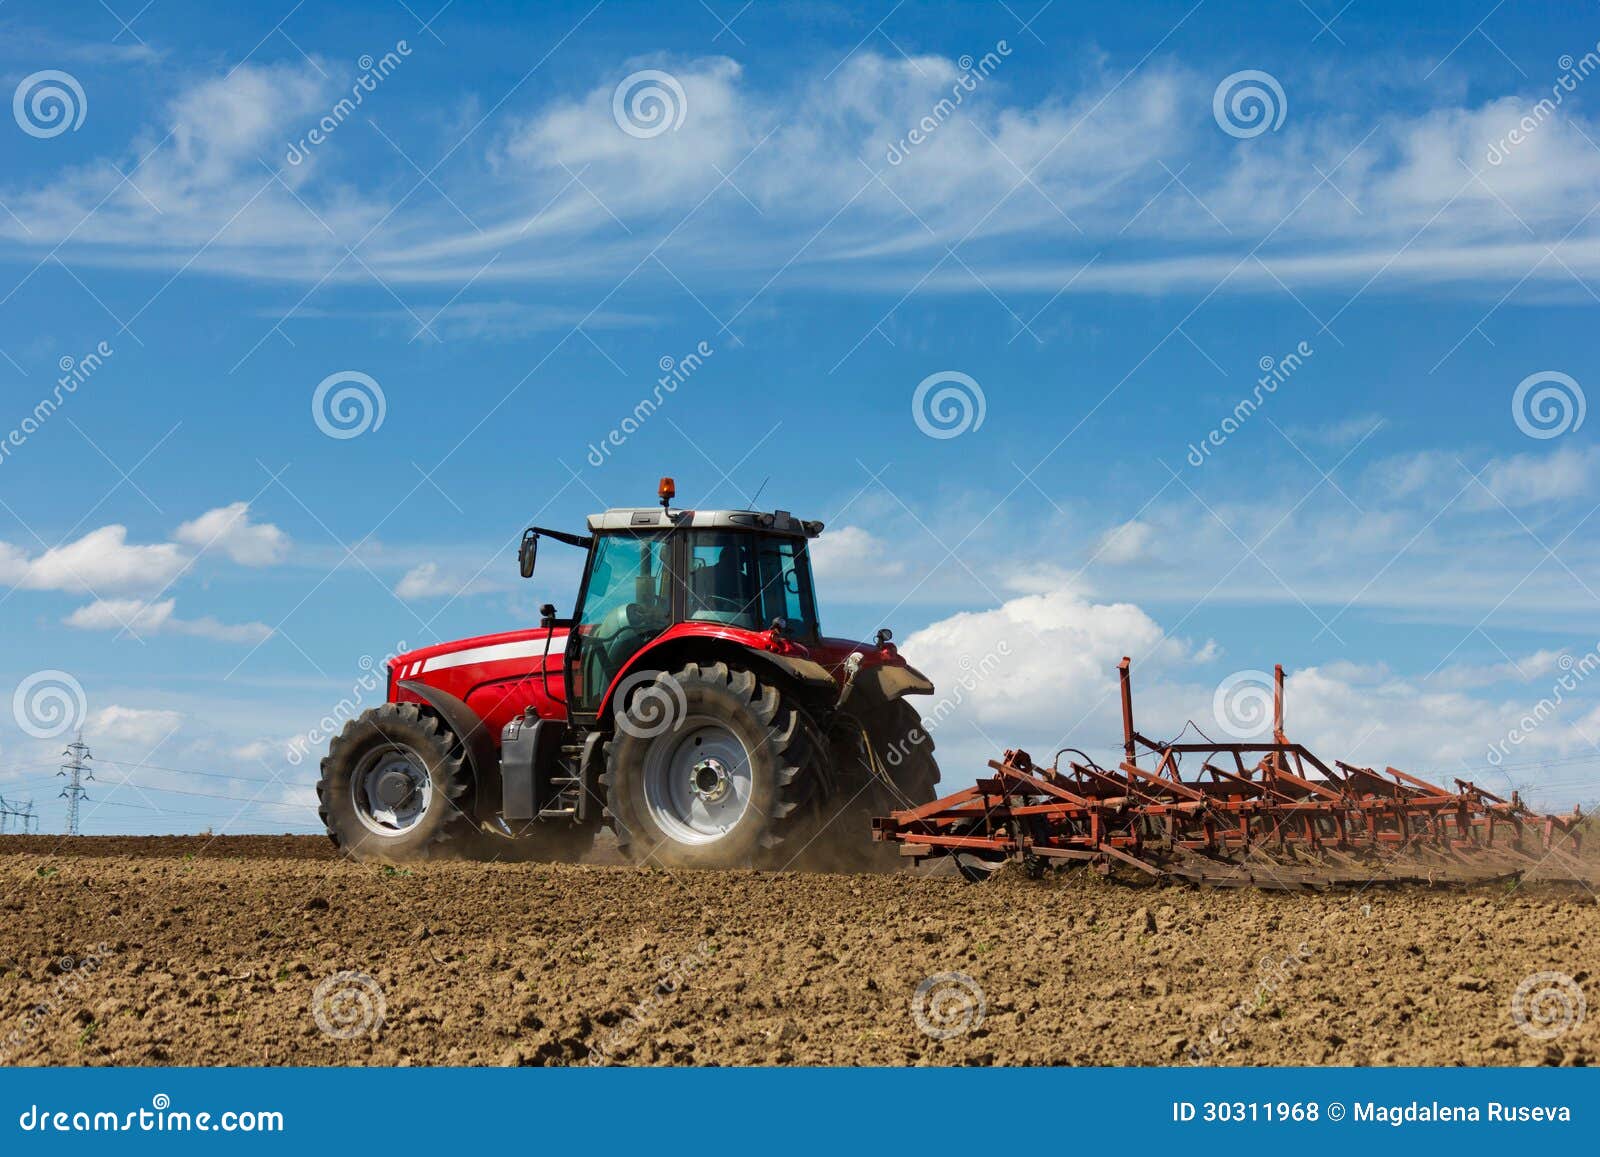 tractor and plow